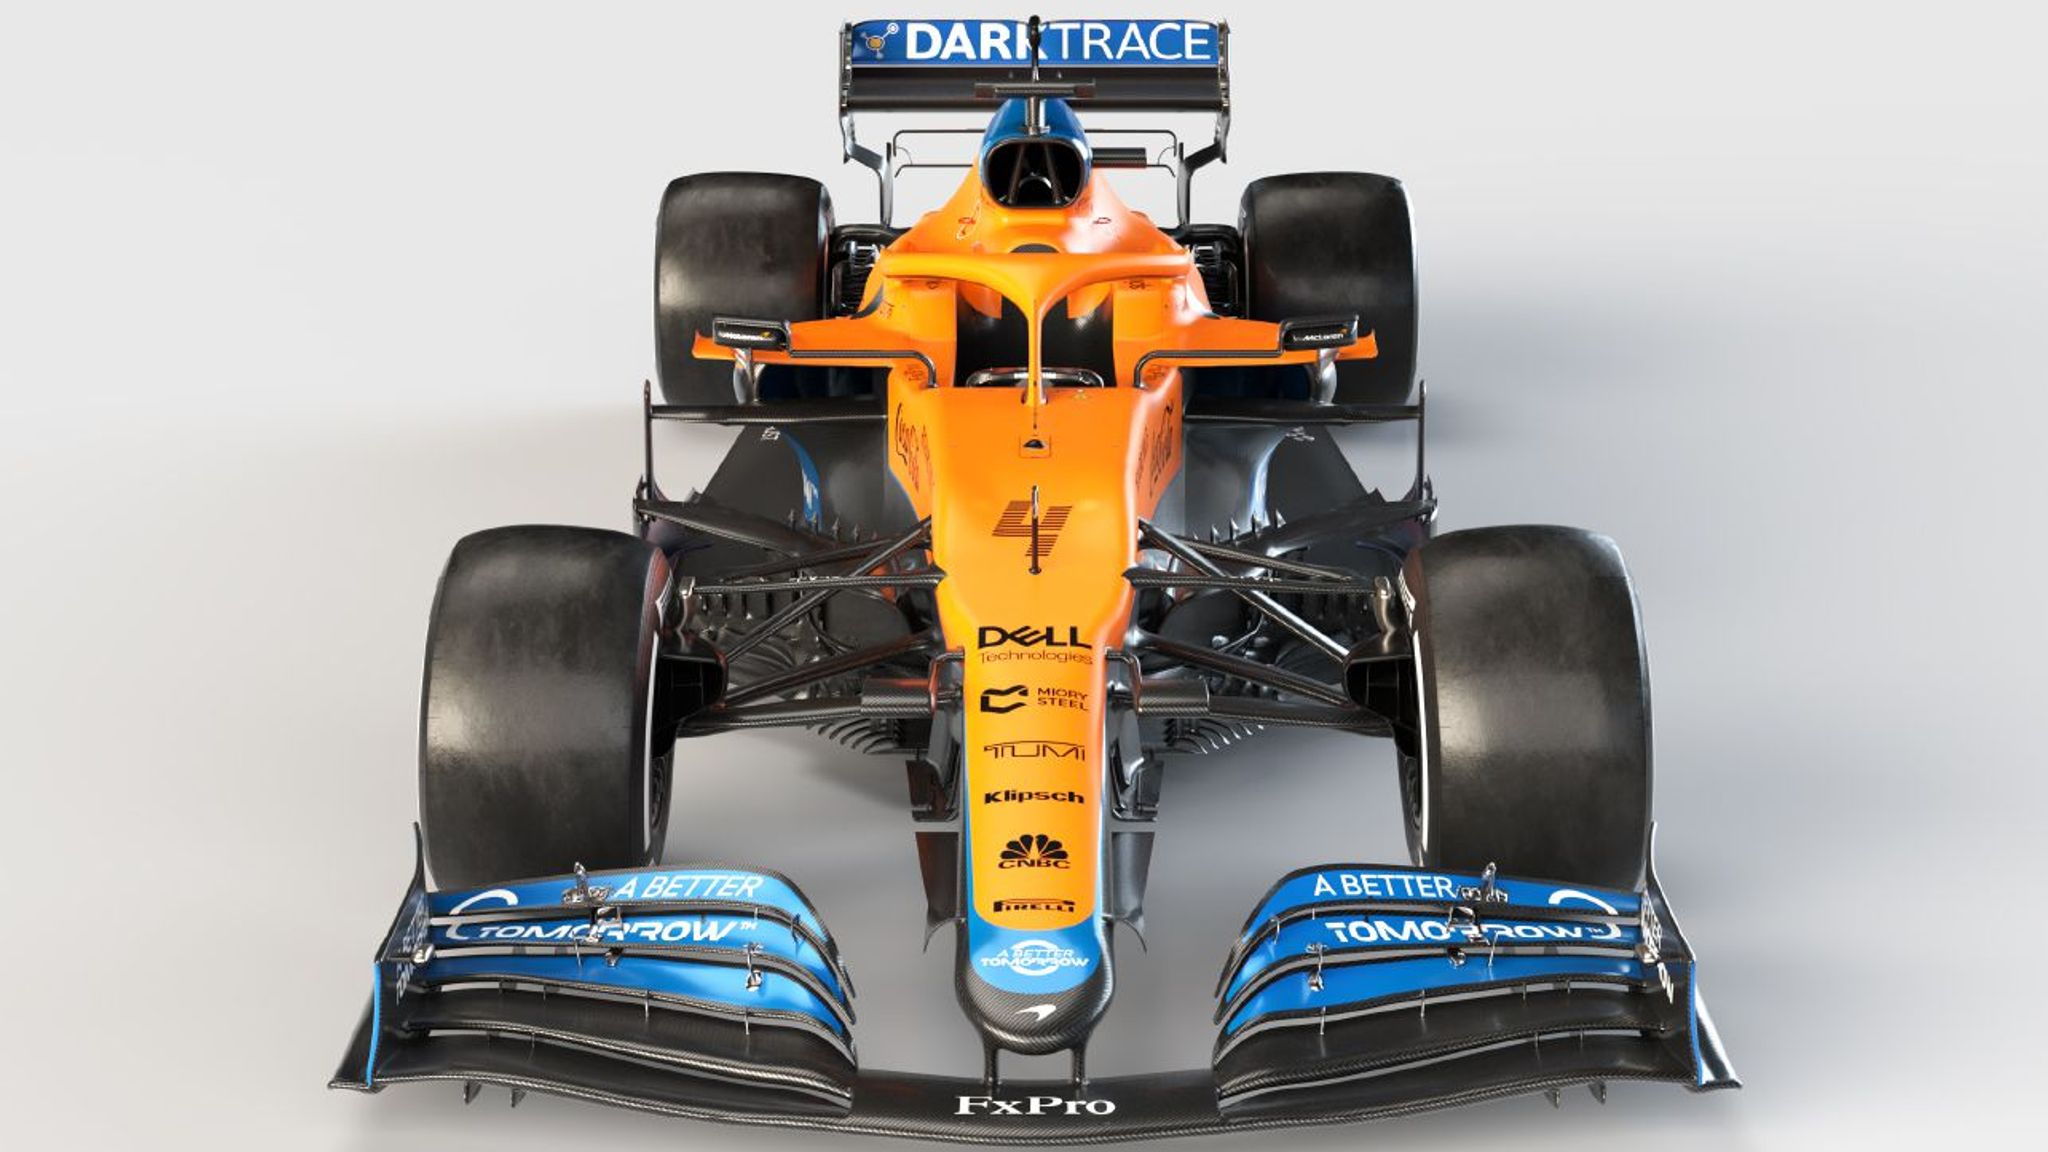 While unveiling F1 cars, McLaren also focused on new era with